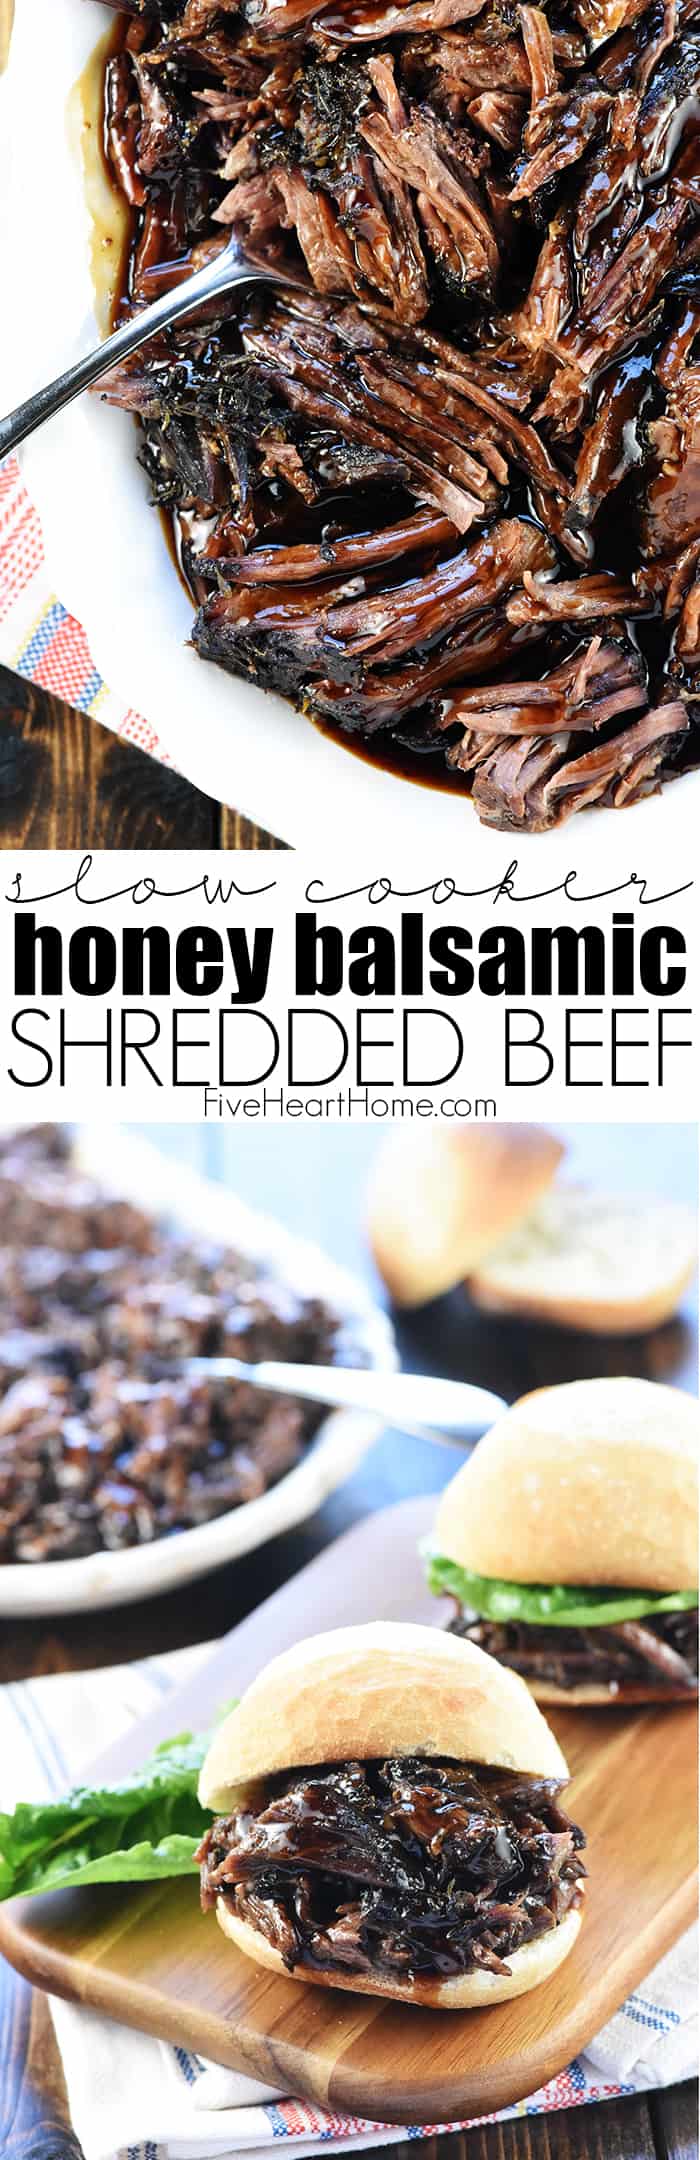 Slow Cooker Honey Balsamic Shredded Beef Sandwiches ~ a delicious, effortless, satisfying crock pot recipe perfect for busy weeknight dinners, parties, or game day! | FiveHeartHome.com via @fivehearthome